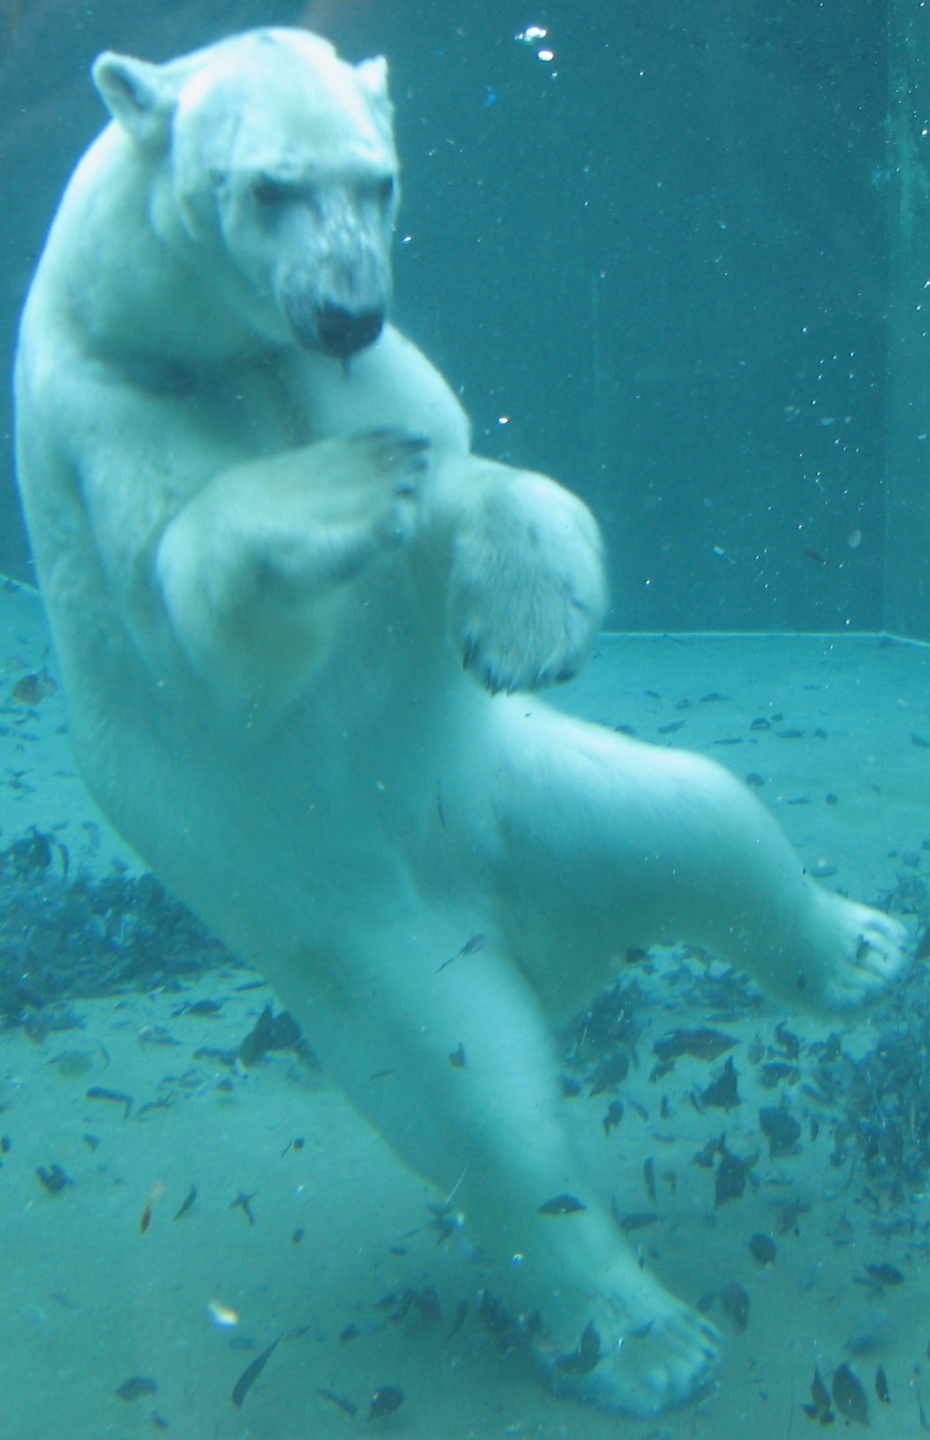 Animal Galleries, pictures of animals from around the world | Large Land  Mammals | Bears | Polar Bear Photo Gallery | Polar Bear arctic Swimming under  water